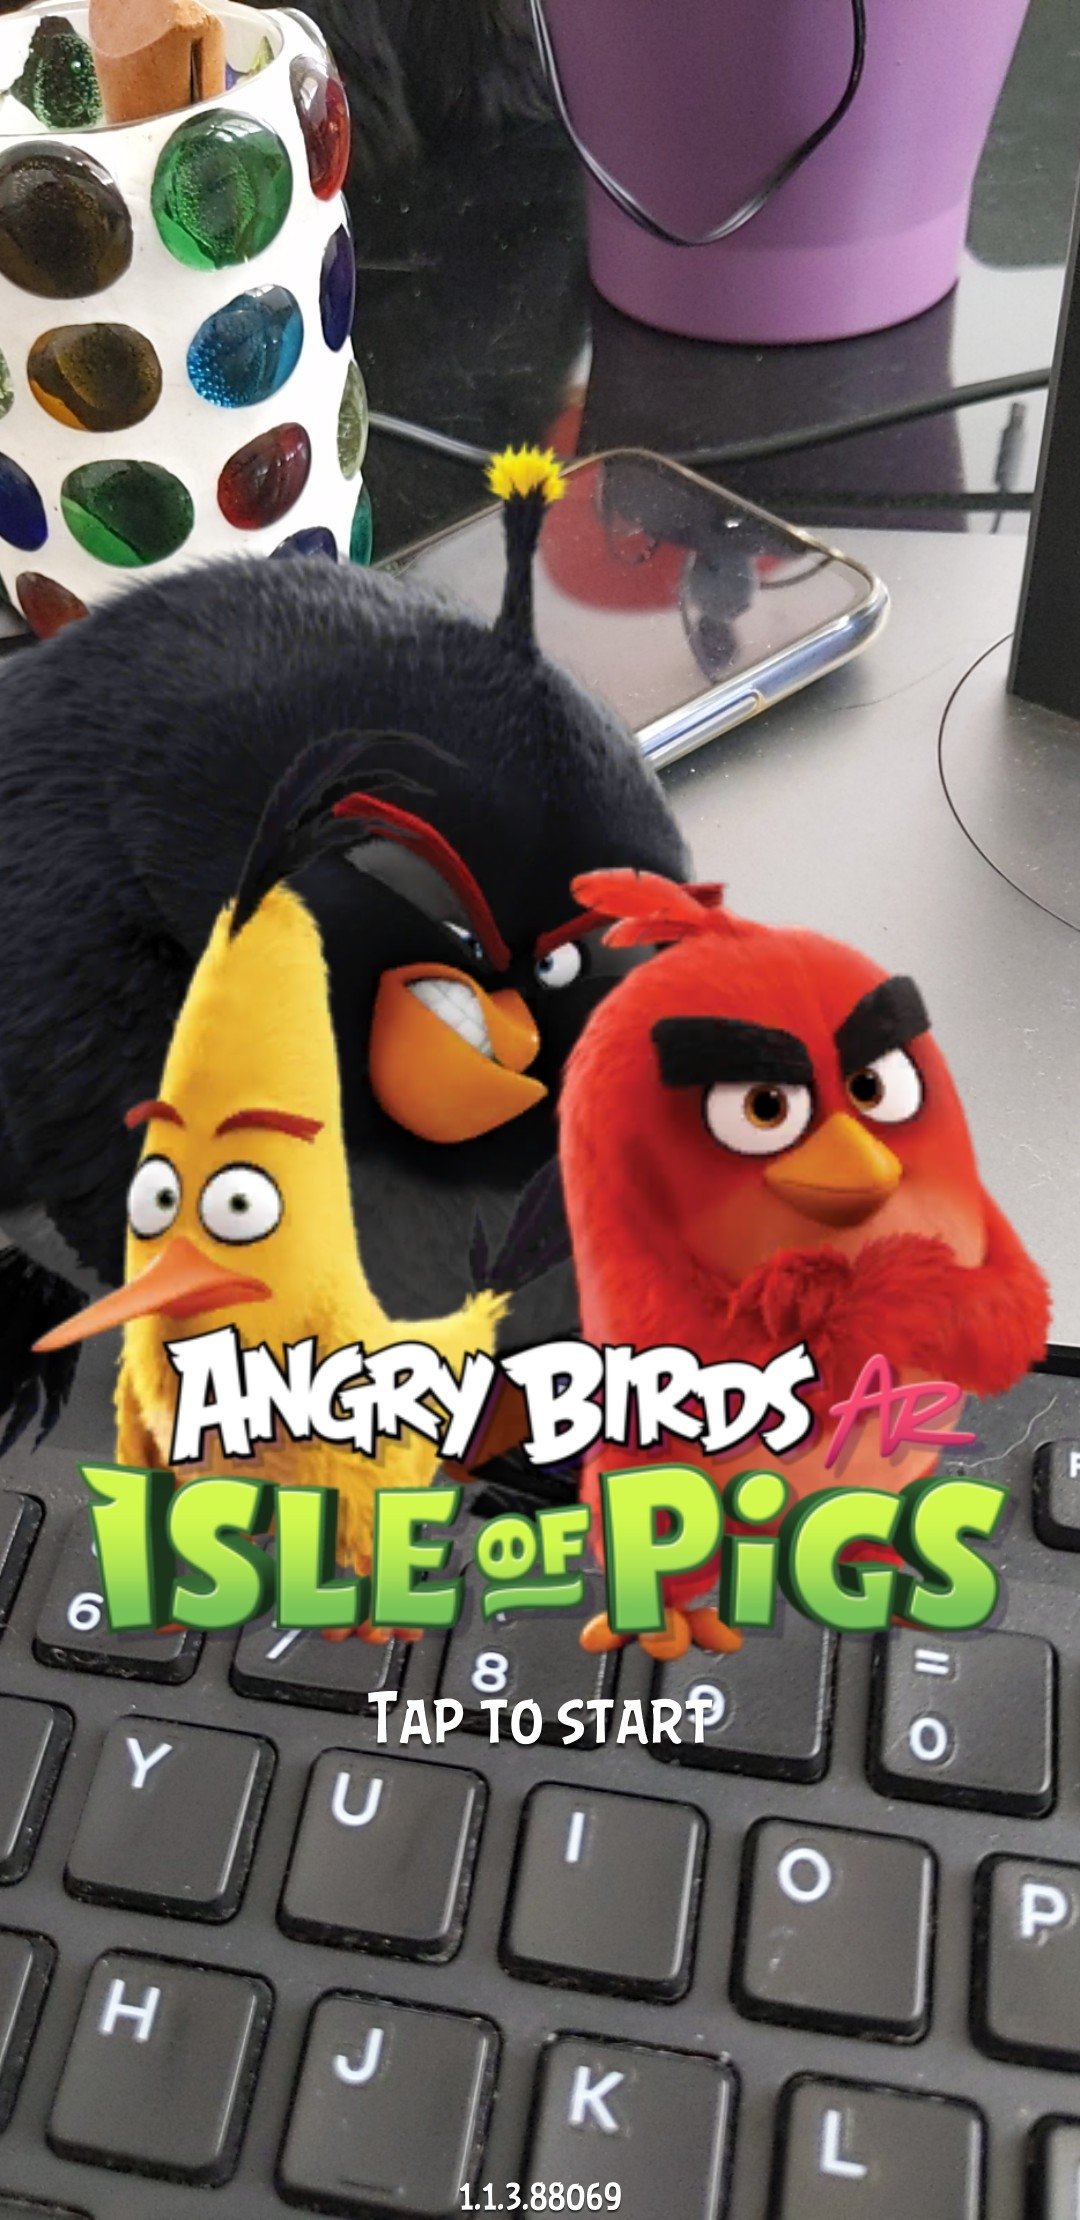 Angry Birds AR: Isle of Pigs 1.1.3.88069 - Download for Android APK Free